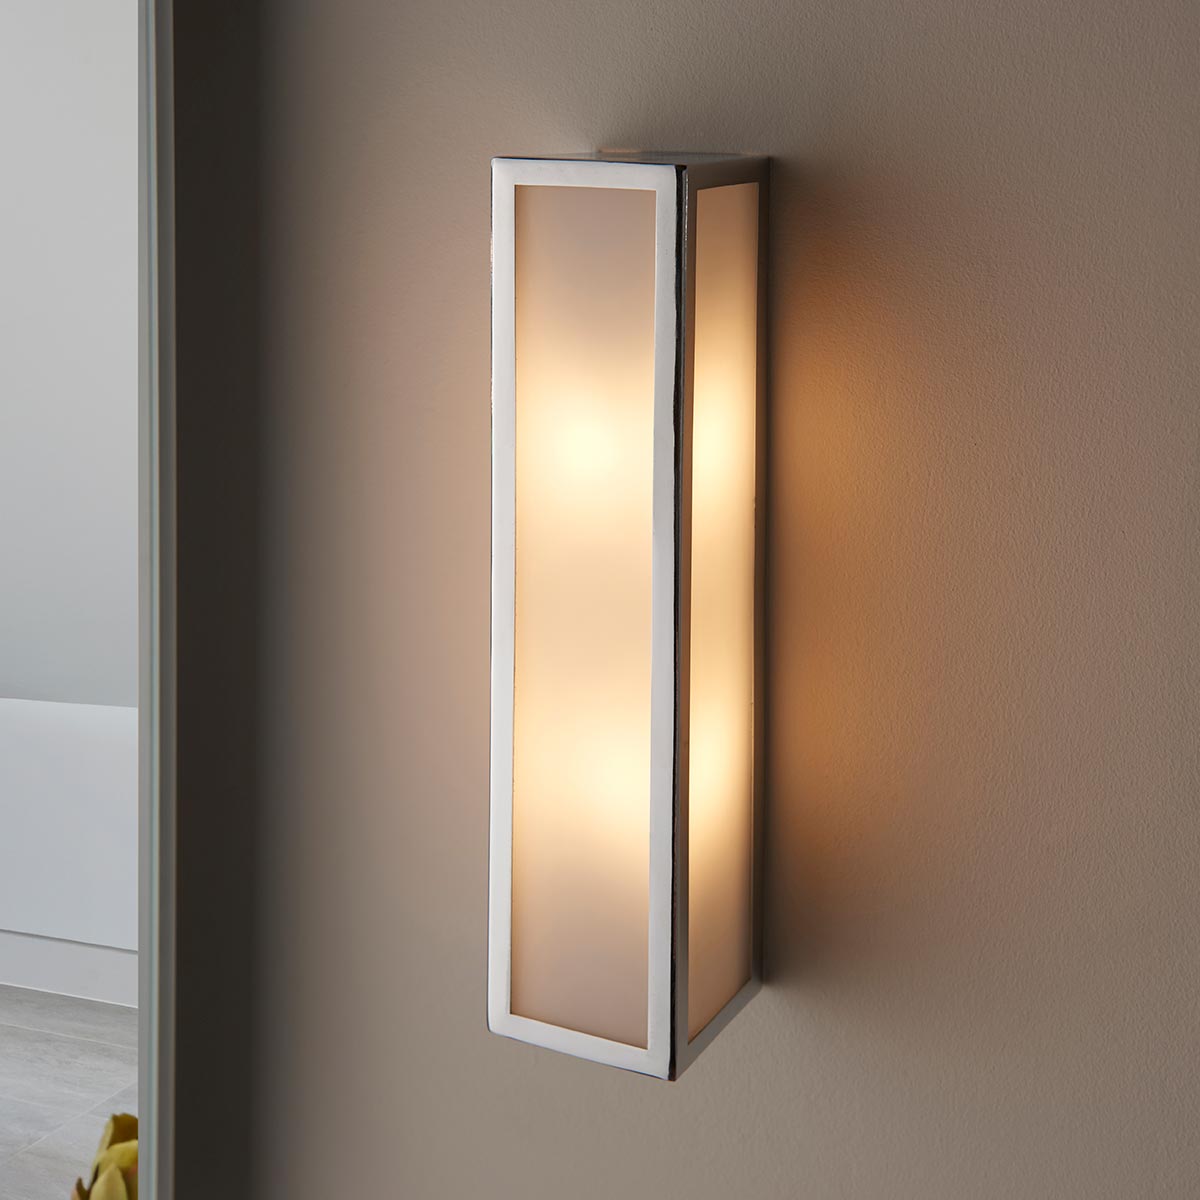 Endon Newham 2 Lamp Box Bathroom Wall Light Chrome Frosted Glass